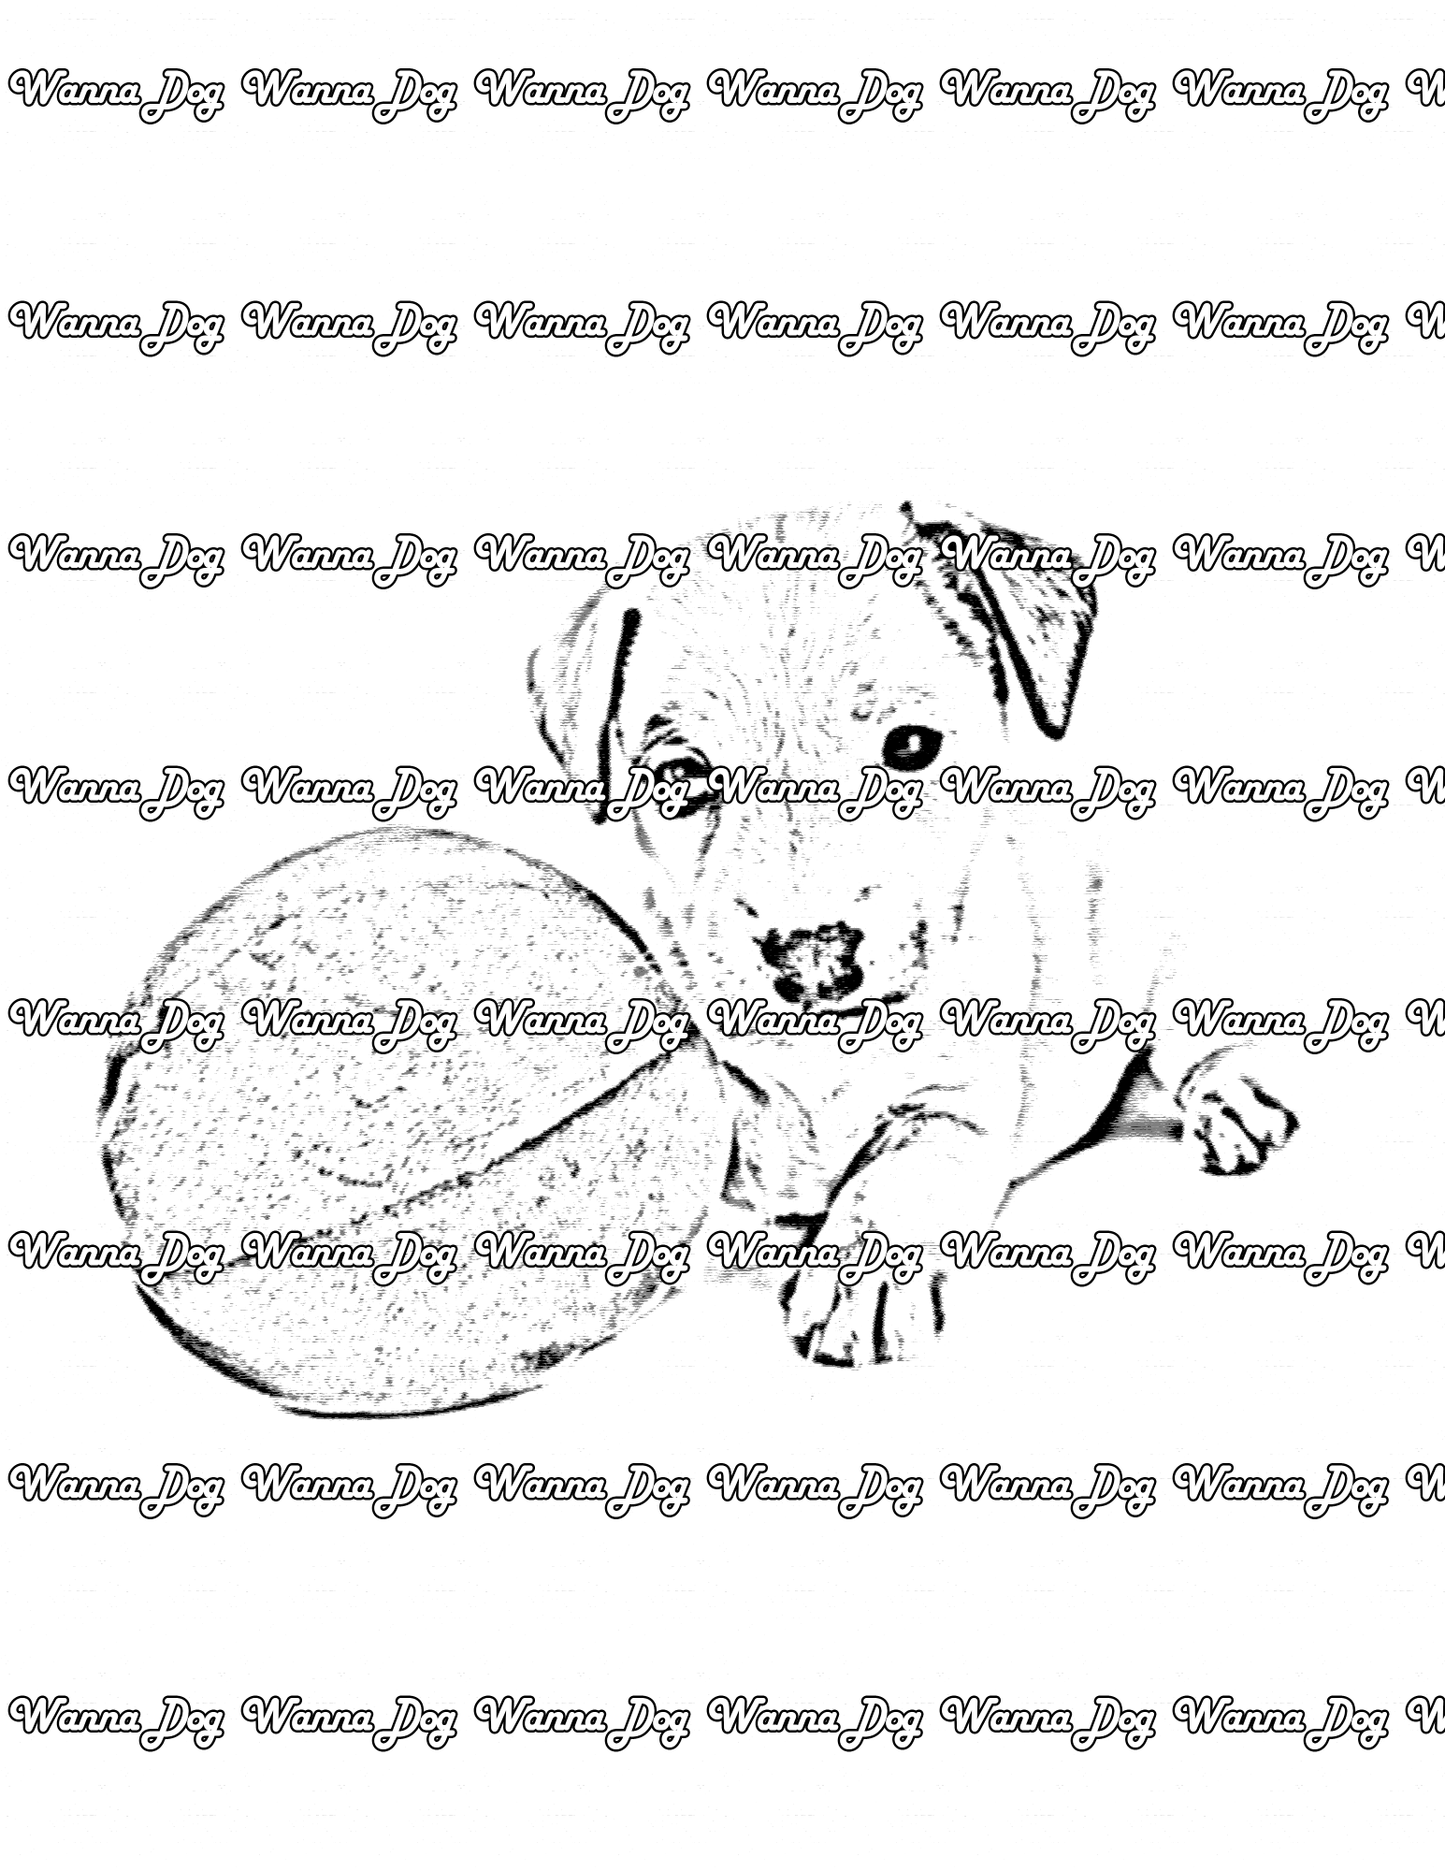 Jack Russell Terrier Coloring Page of a Jack Russell Terrier with a beach ball